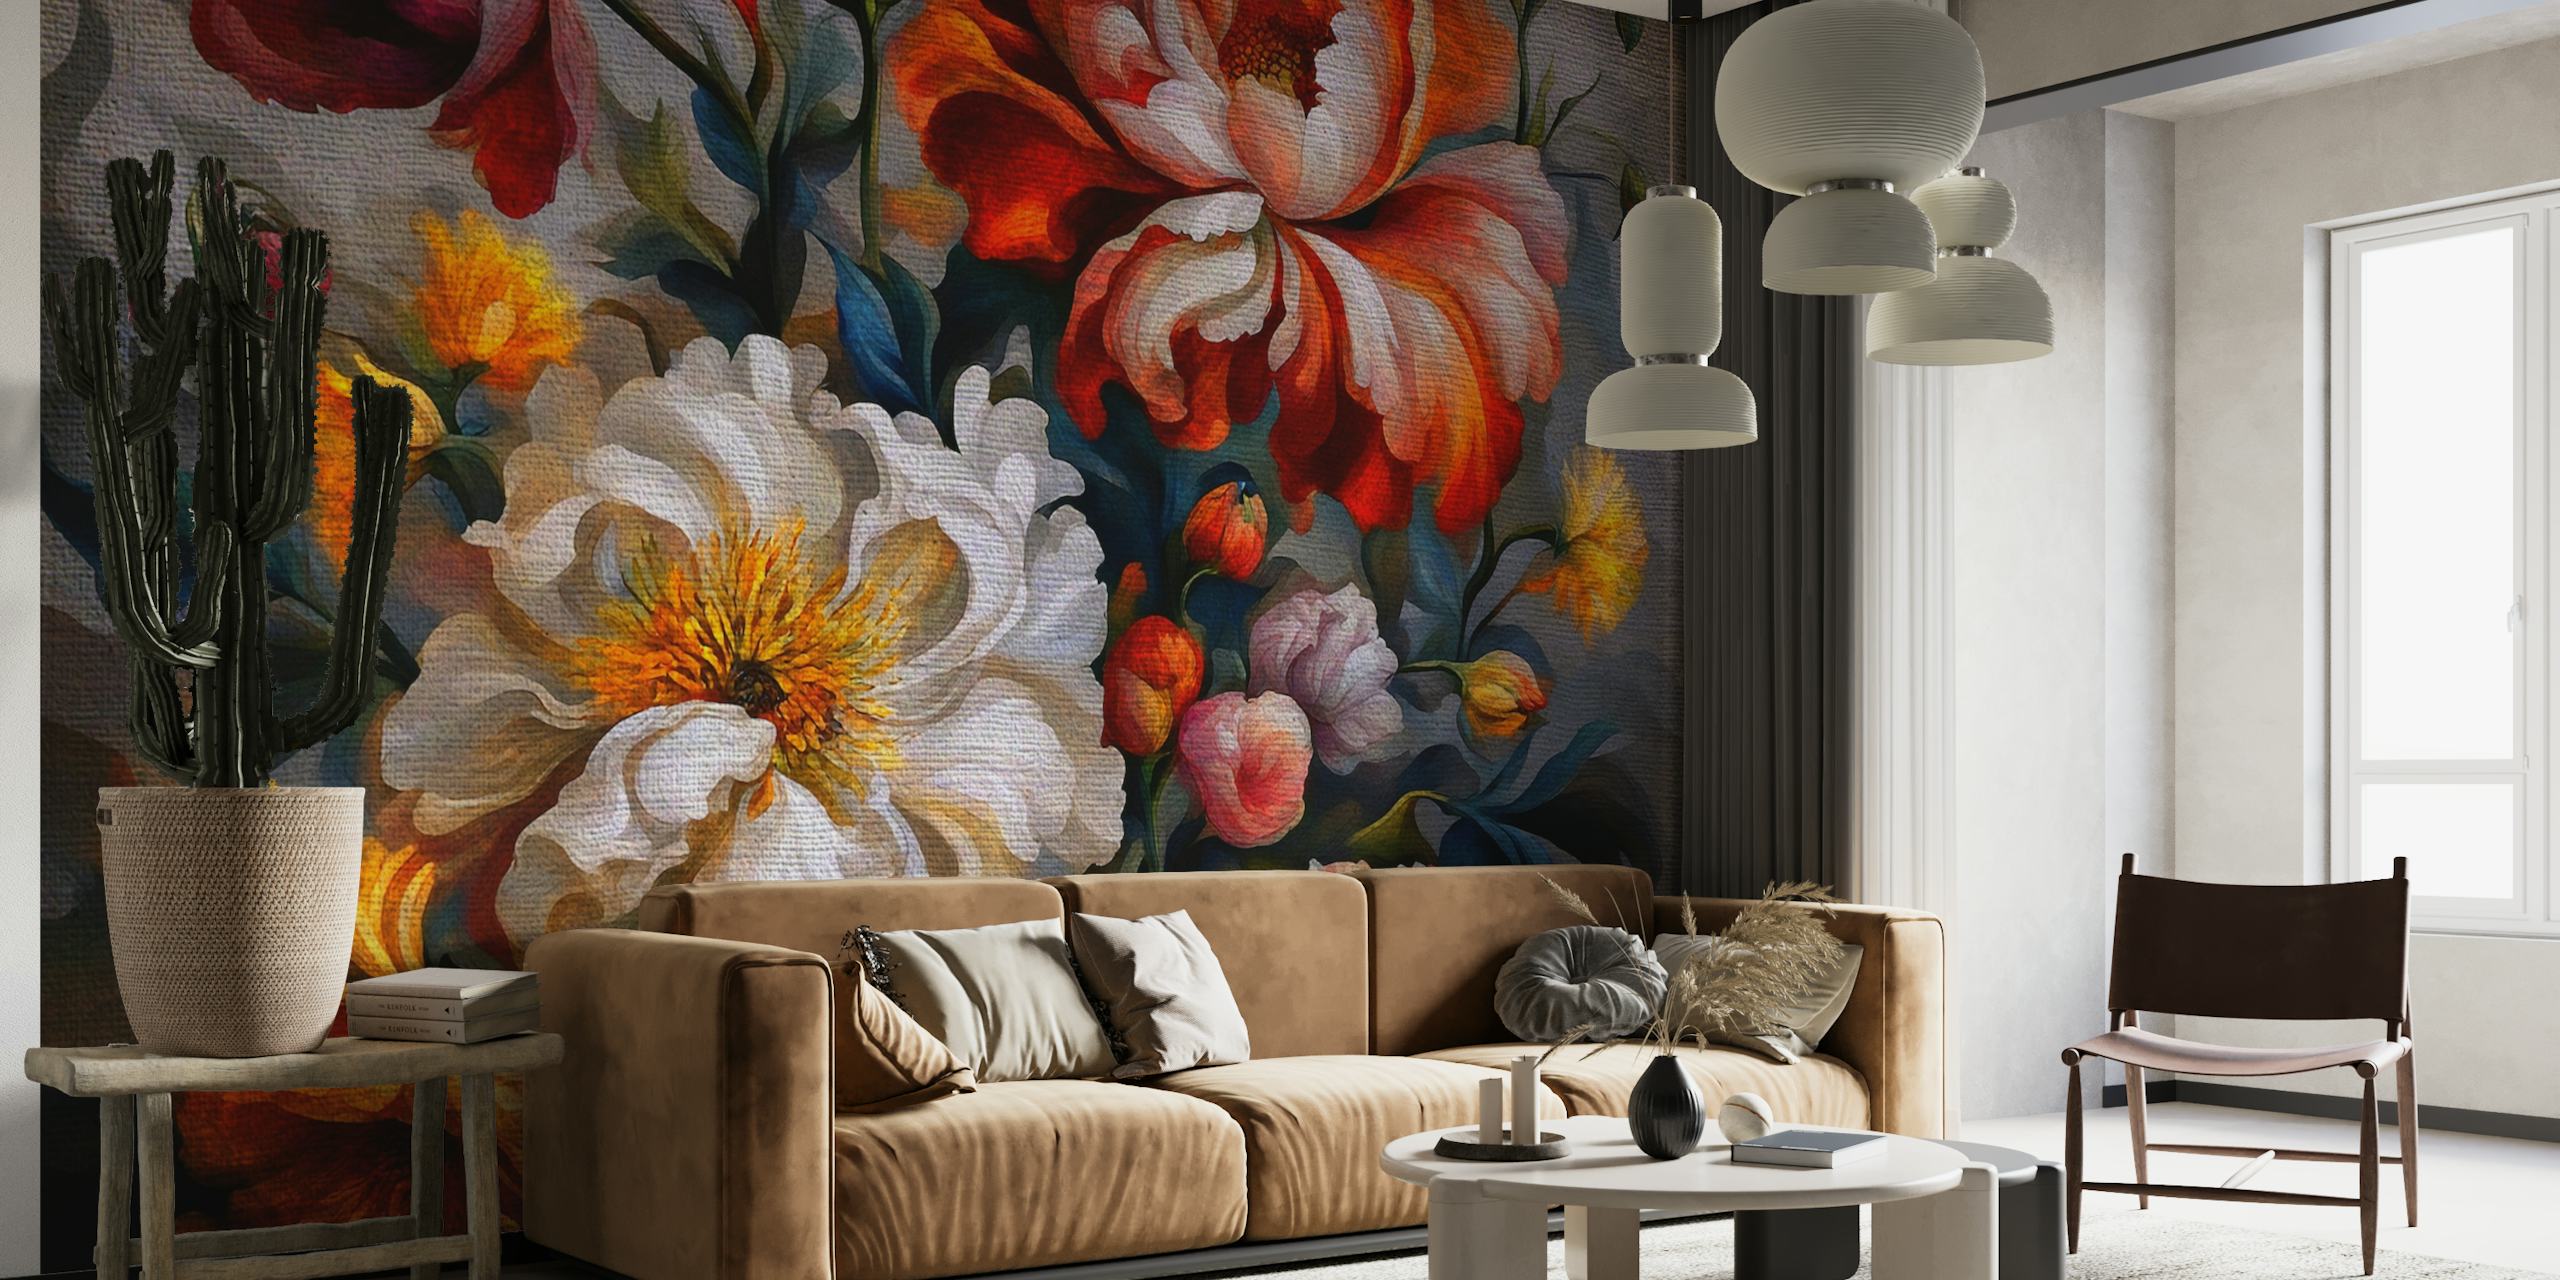 Baroque style floral wall mural on a moody dark background